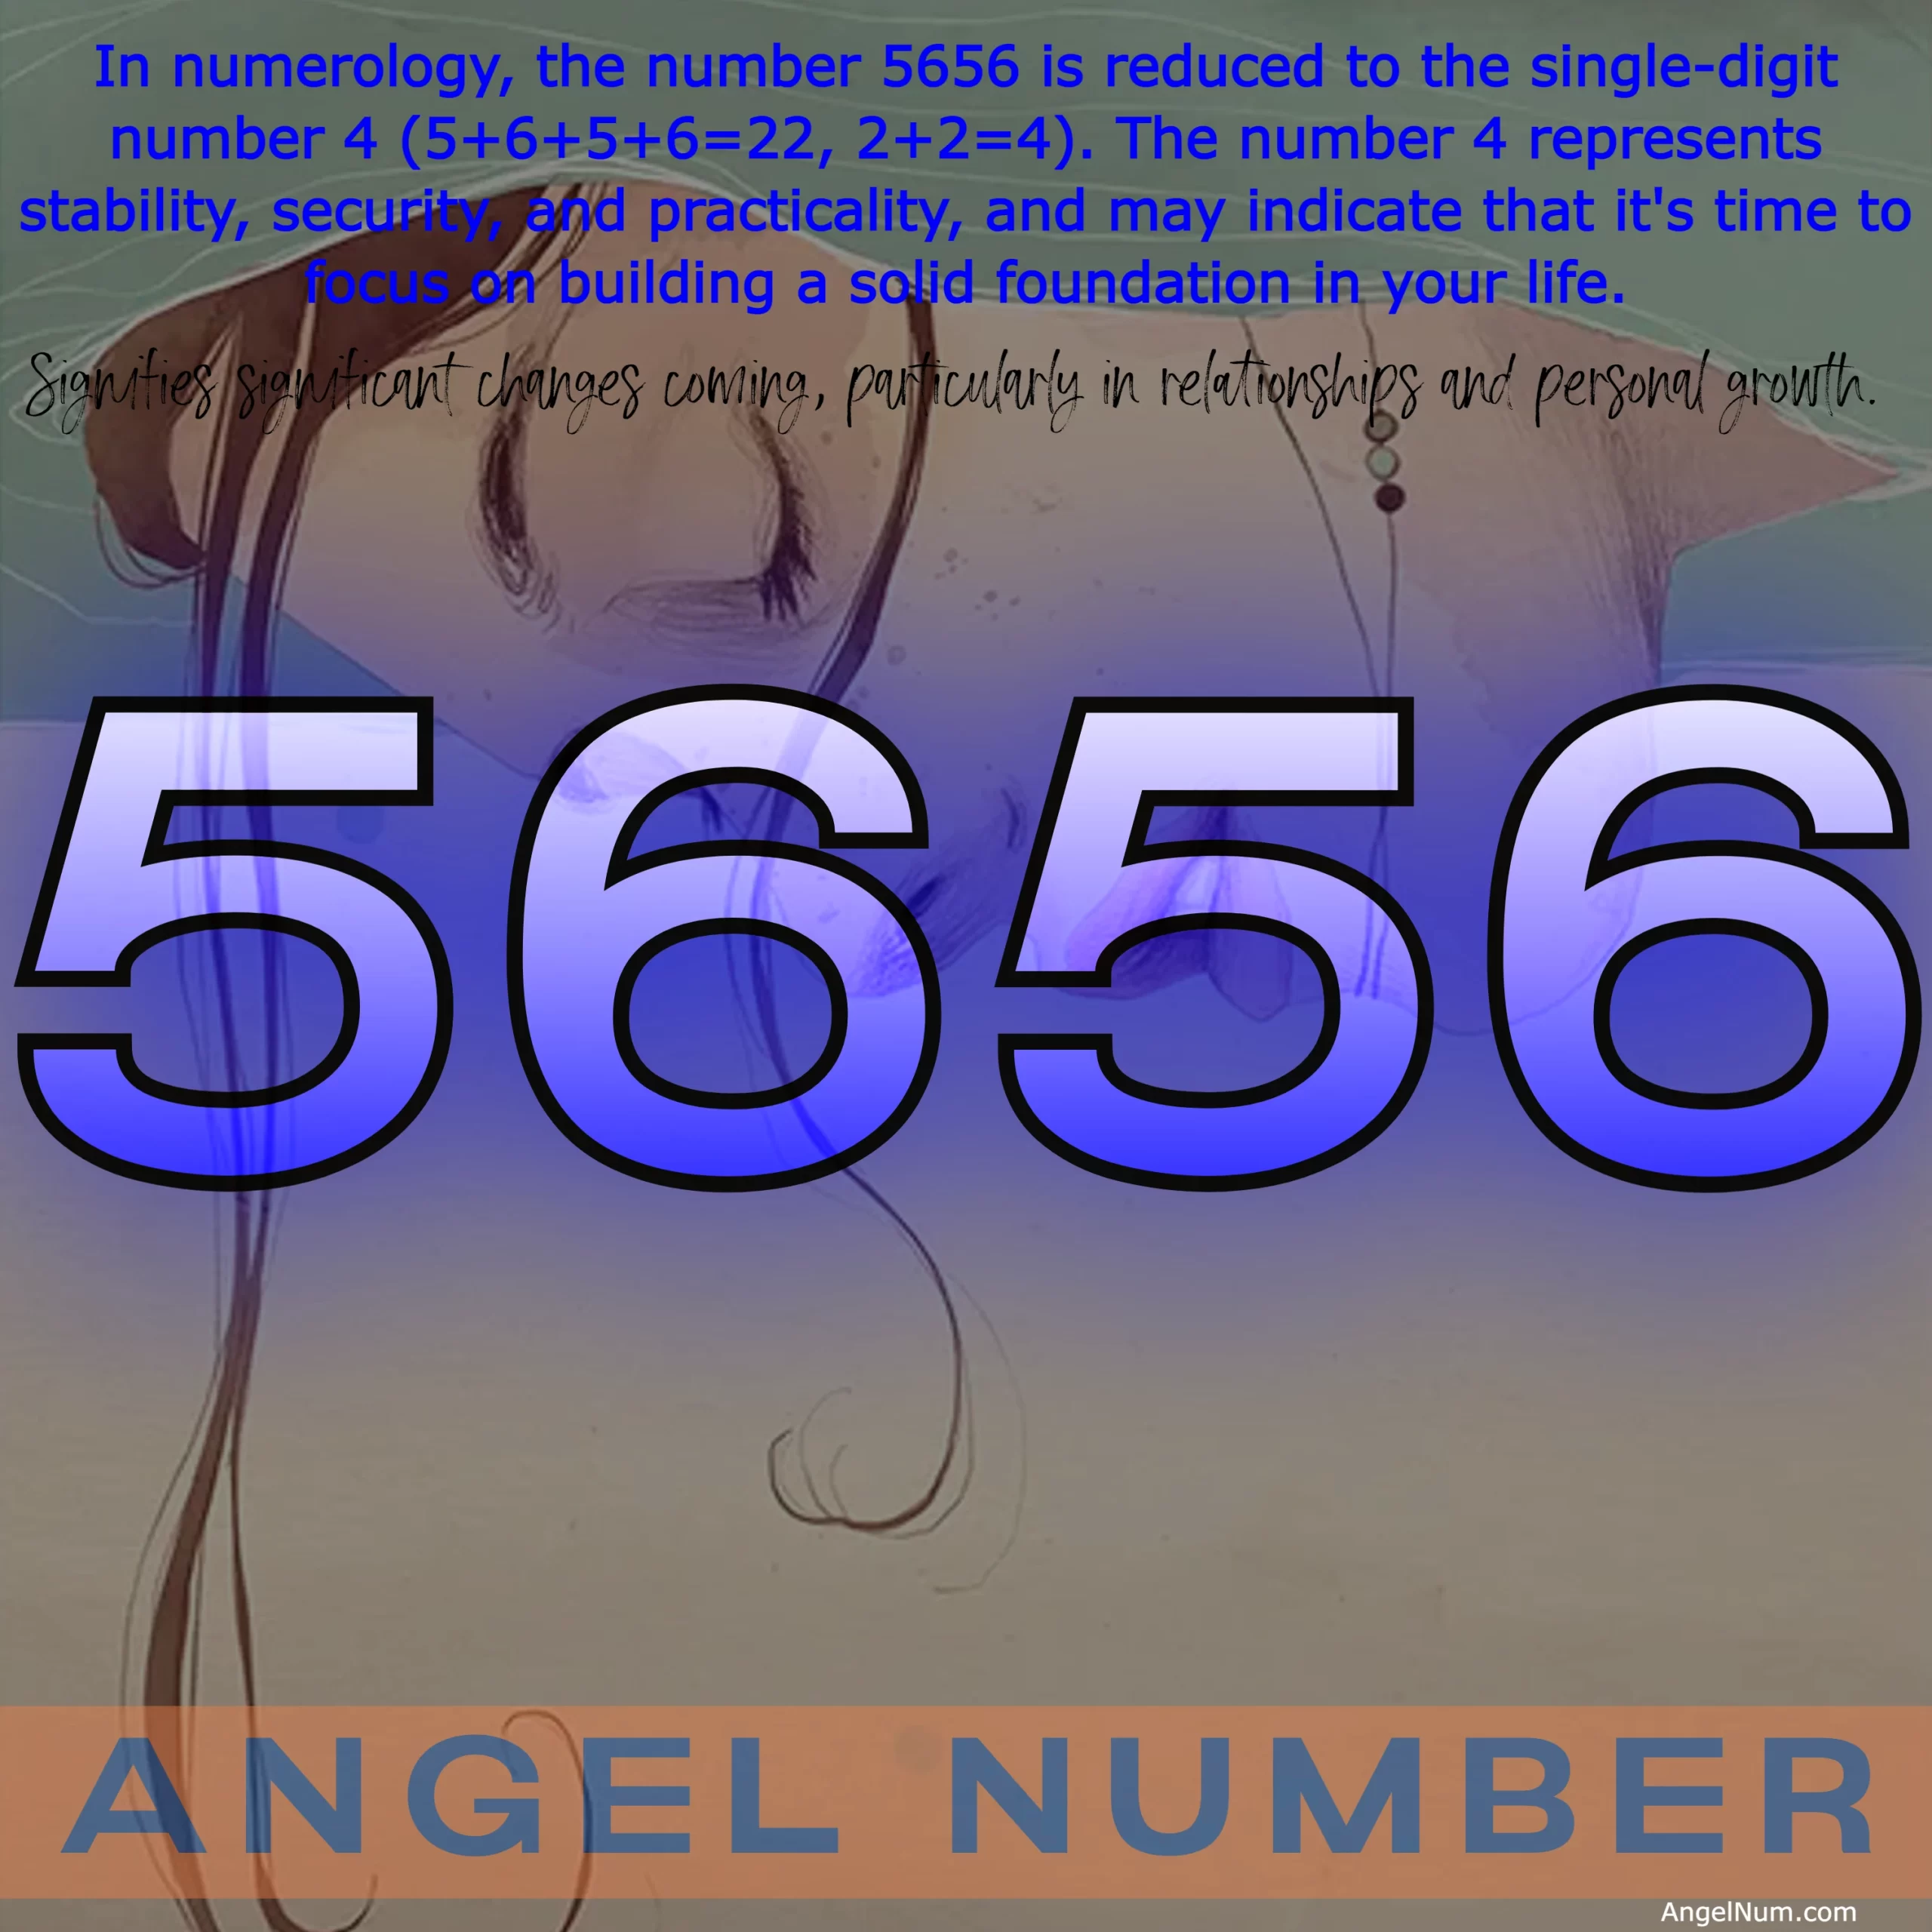 Angel Number 5656: The Significance of Change and Balance